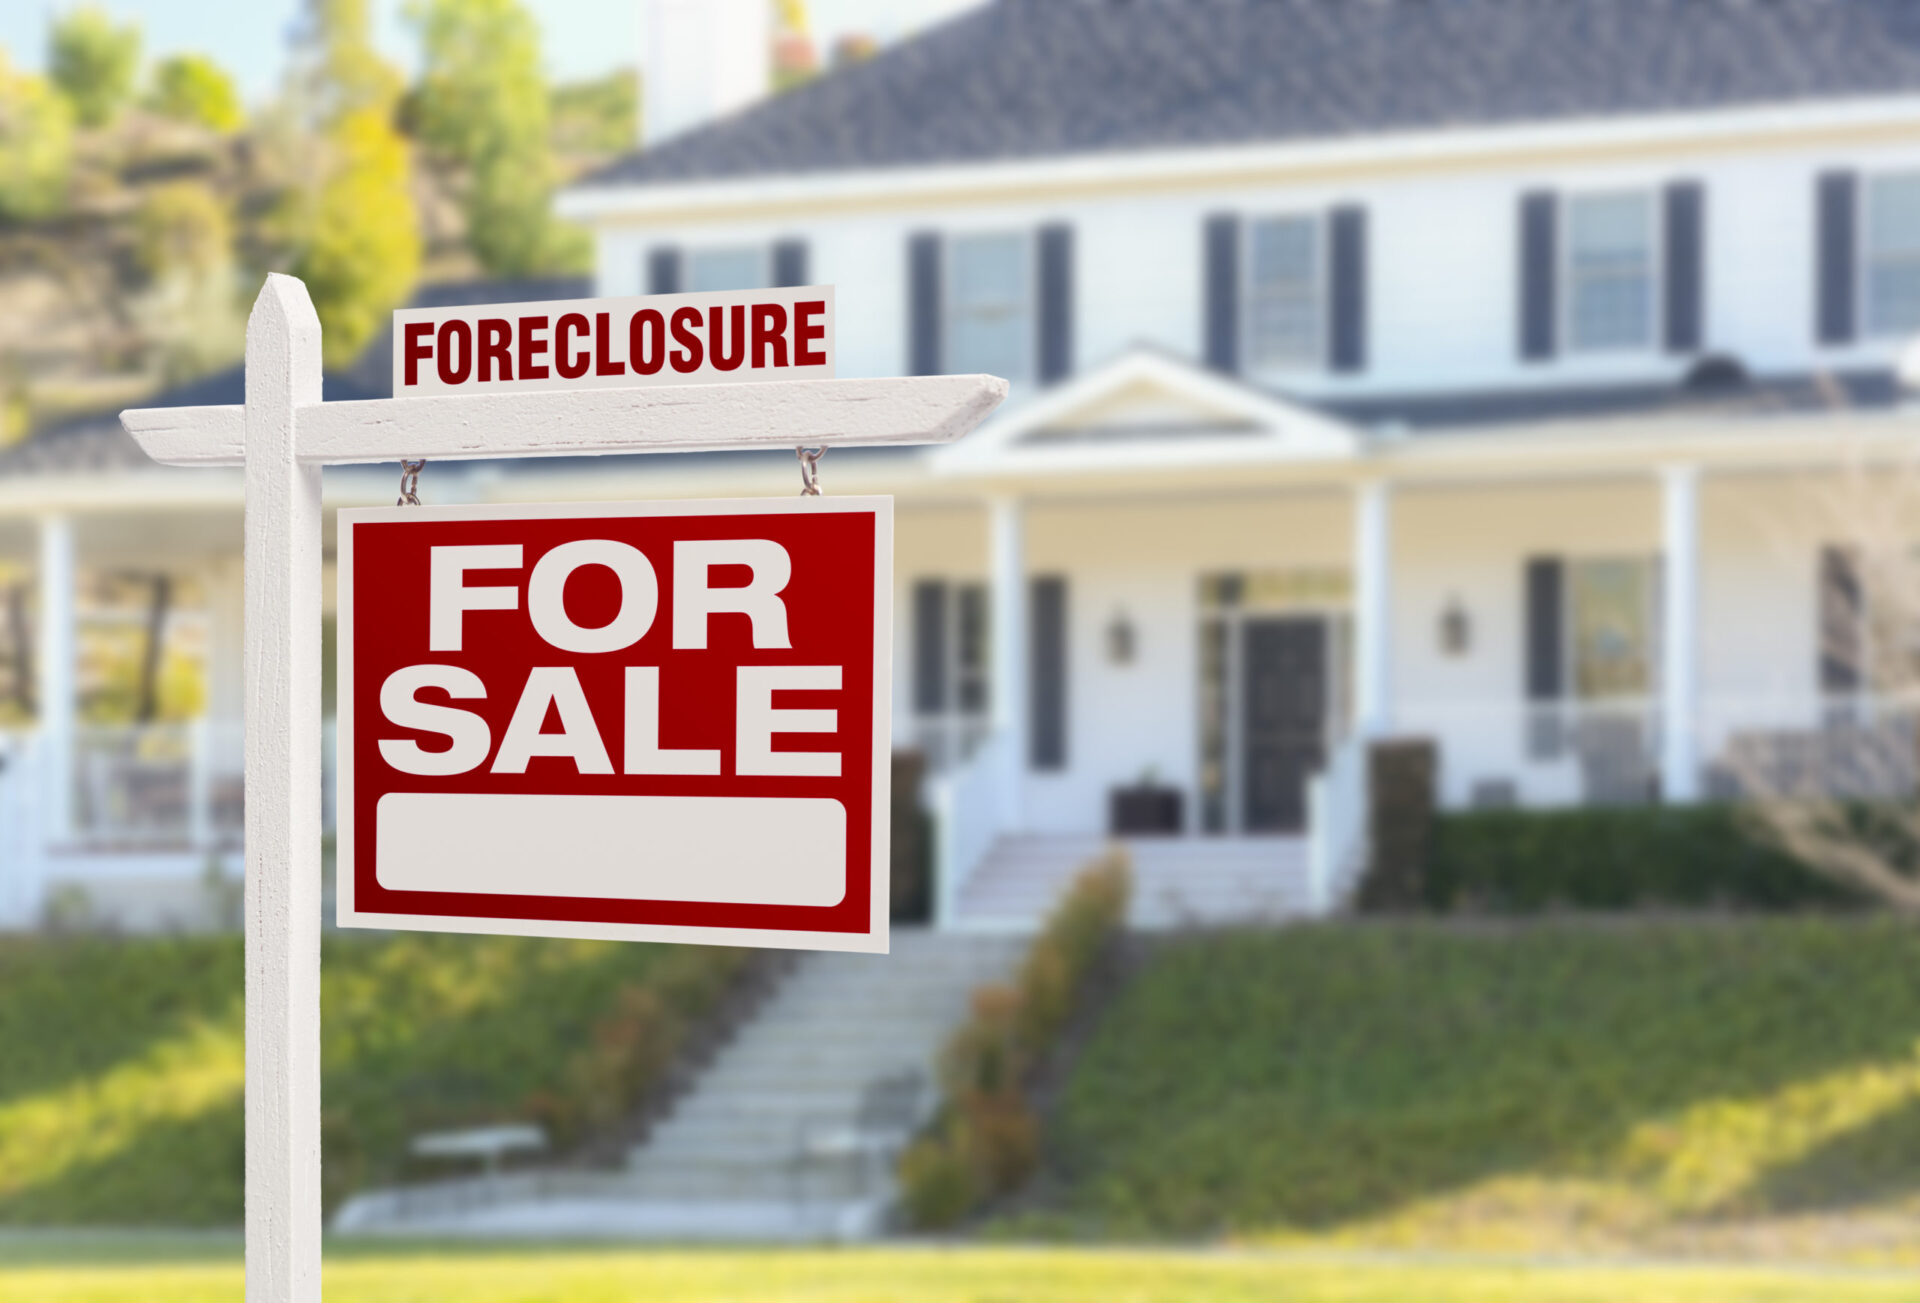 Foreclosure Ban Extended Through February